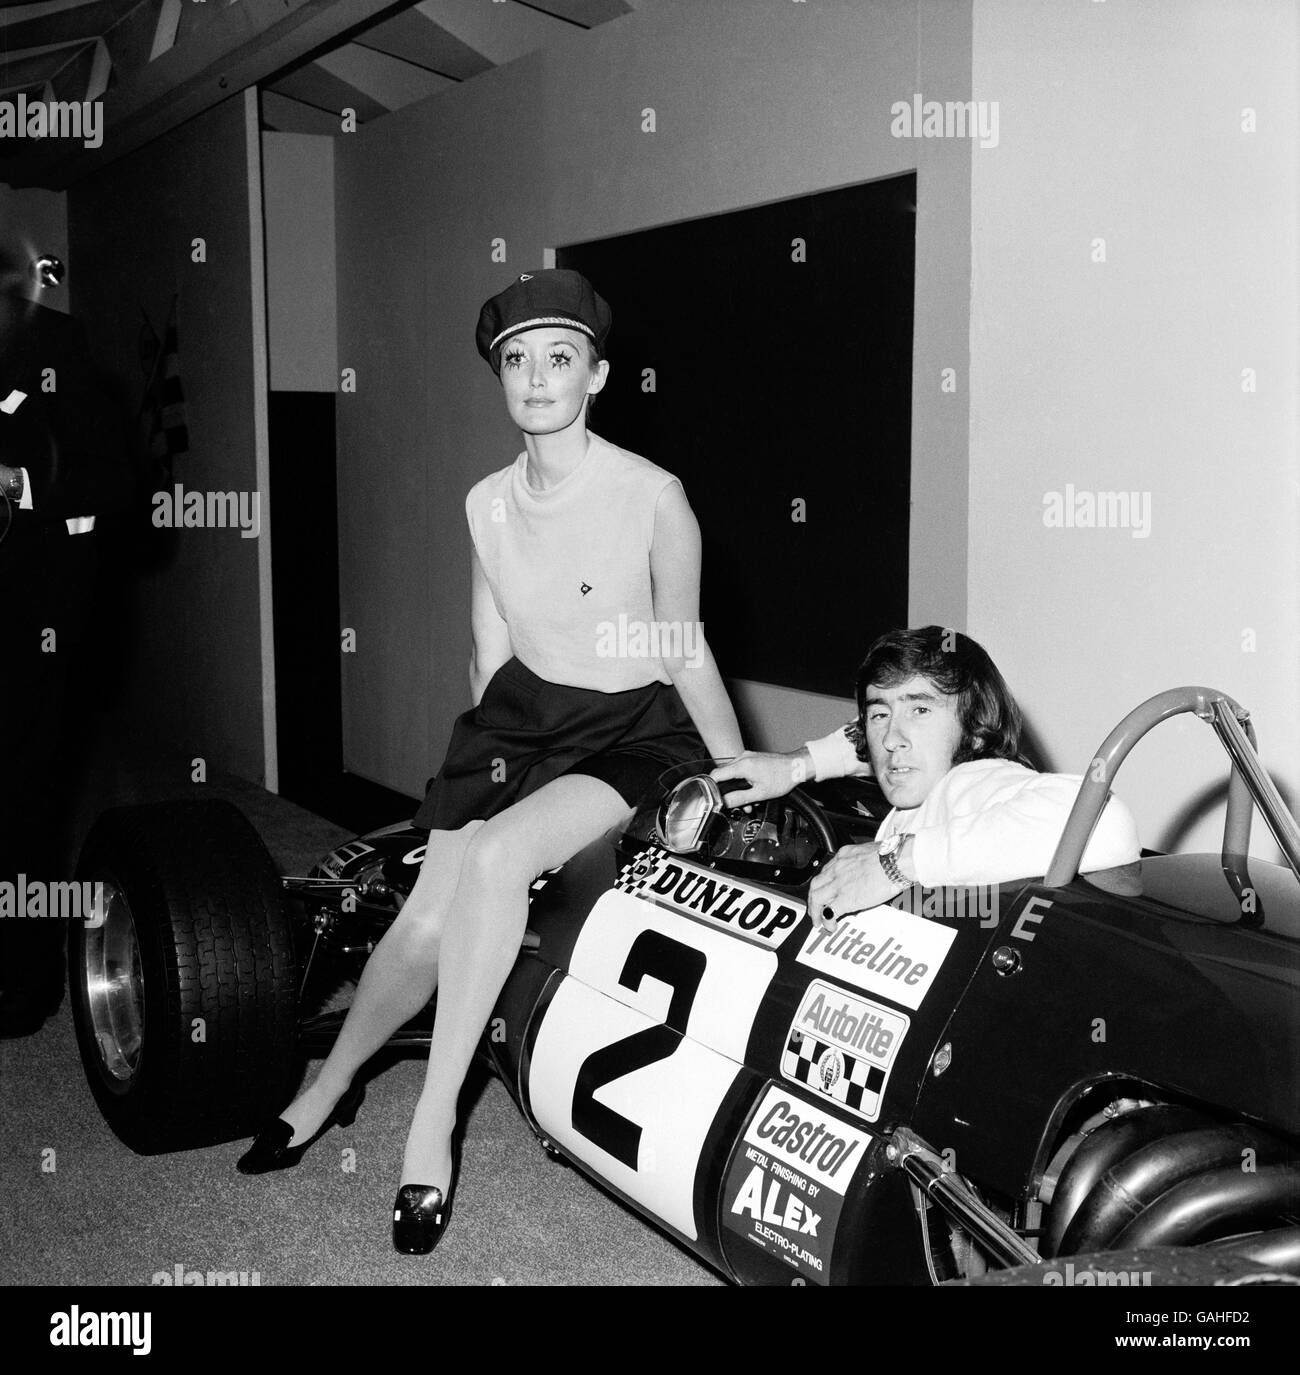 Jackie Stewart is joined by a model to advertise Dunlop tyres in London in 1969.